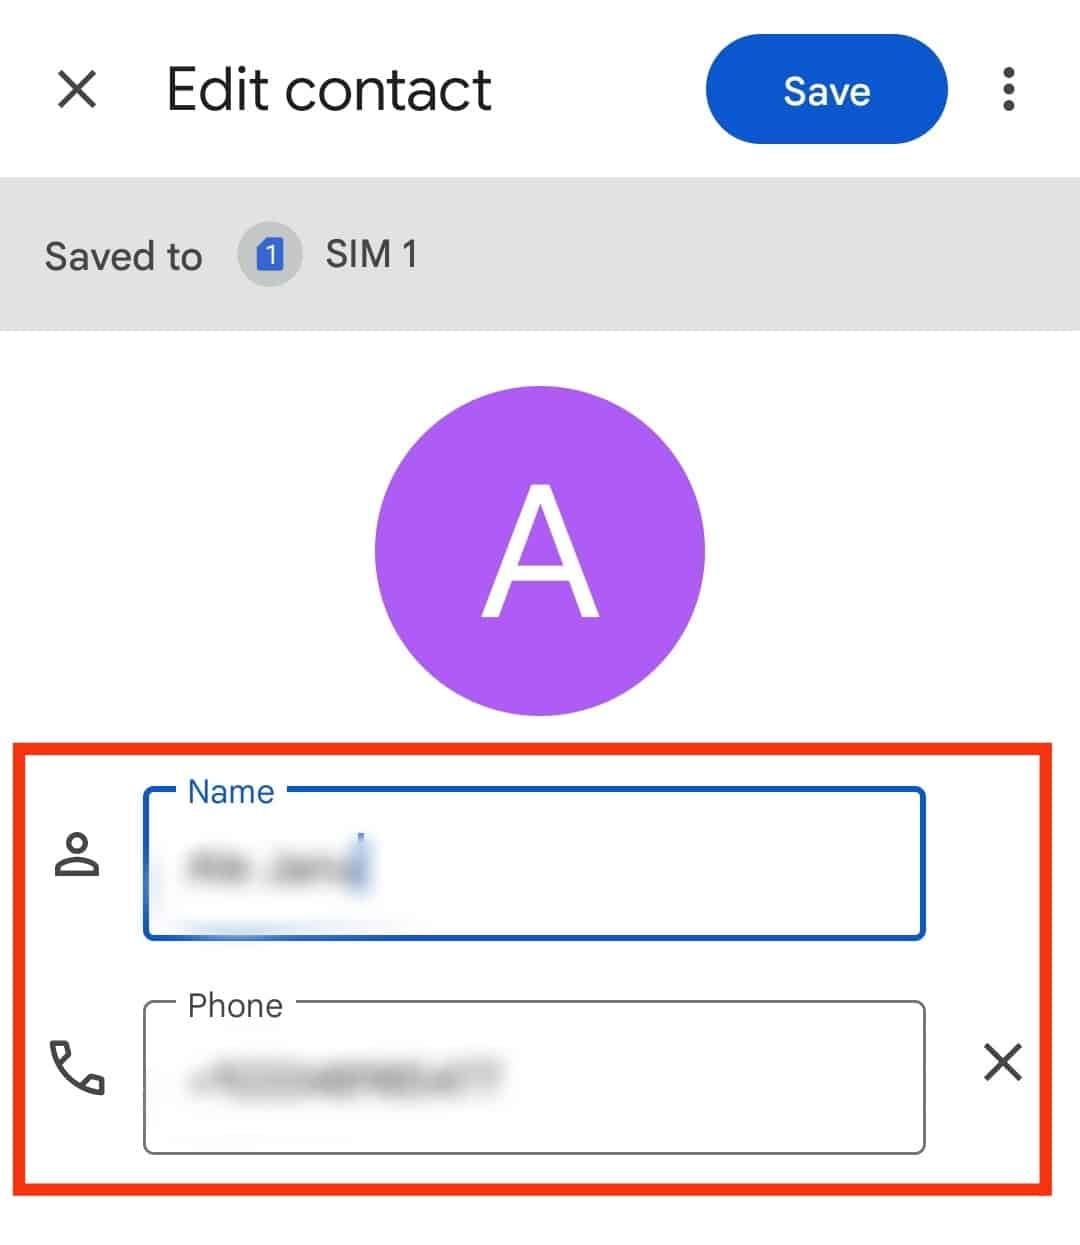 Edit The Contact As You Wish